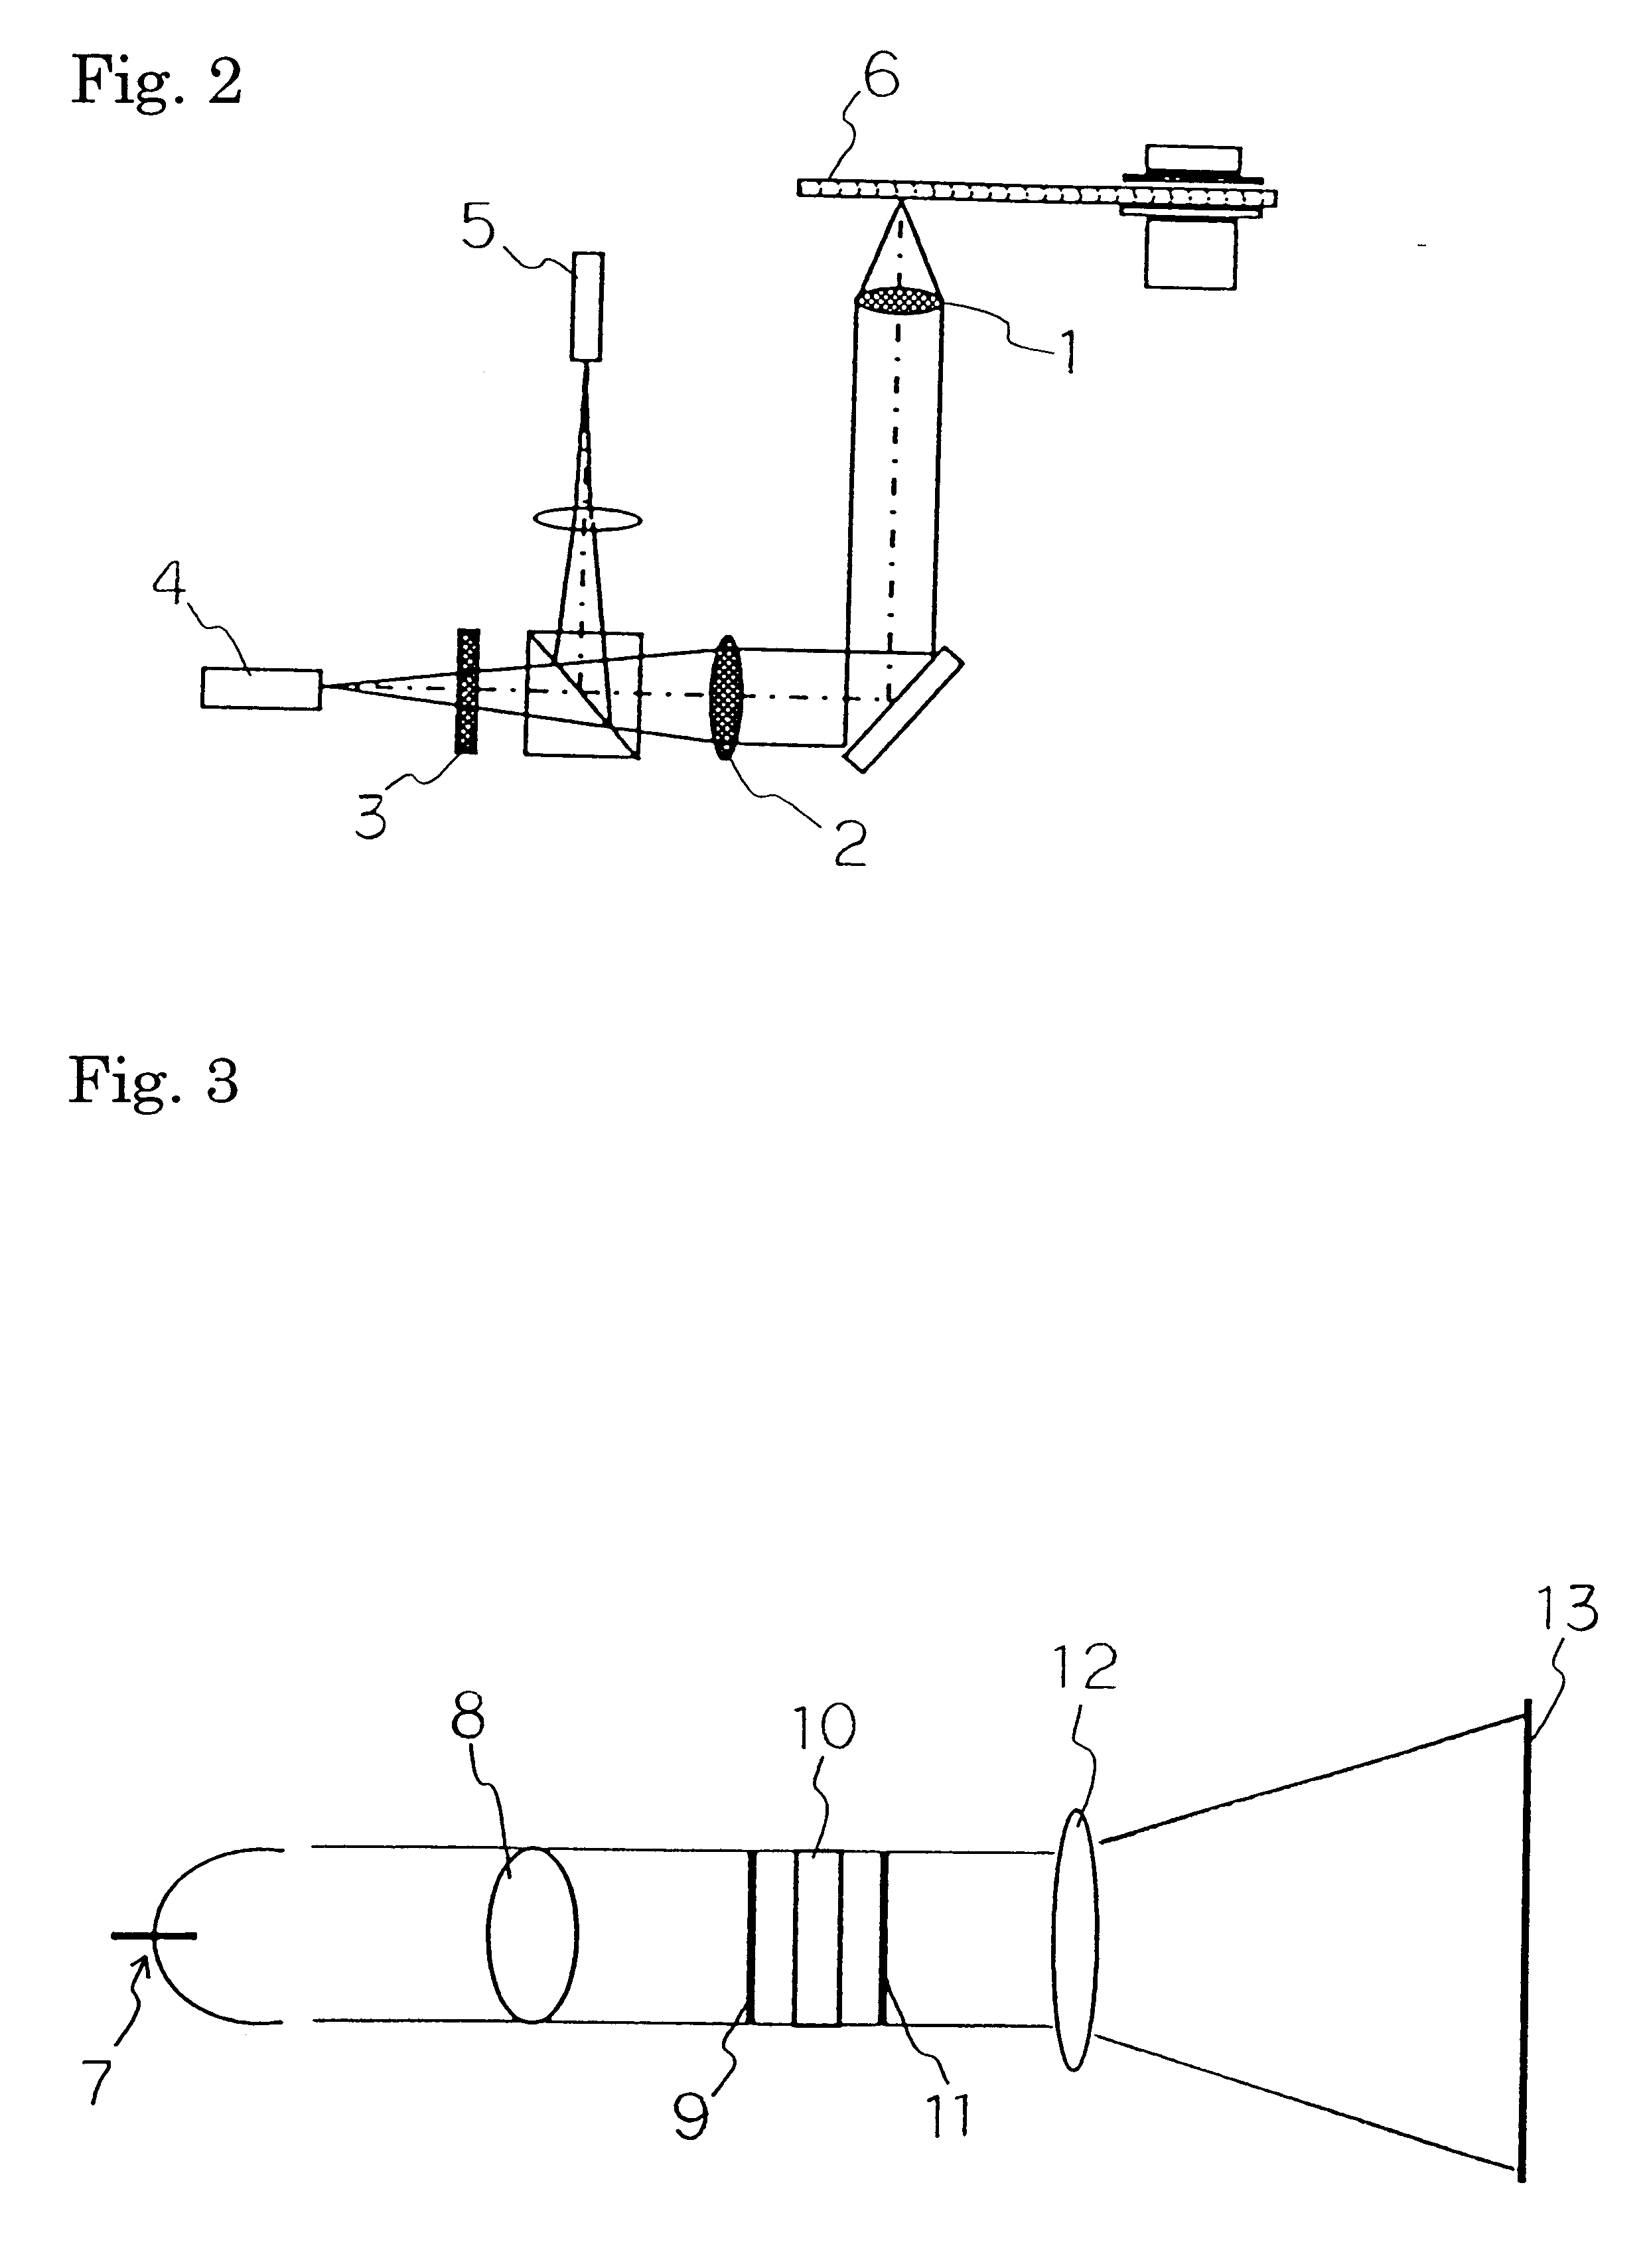 Process for the preparation of non-birefringent optical resin and optical elements made by using the resin prepared by the process